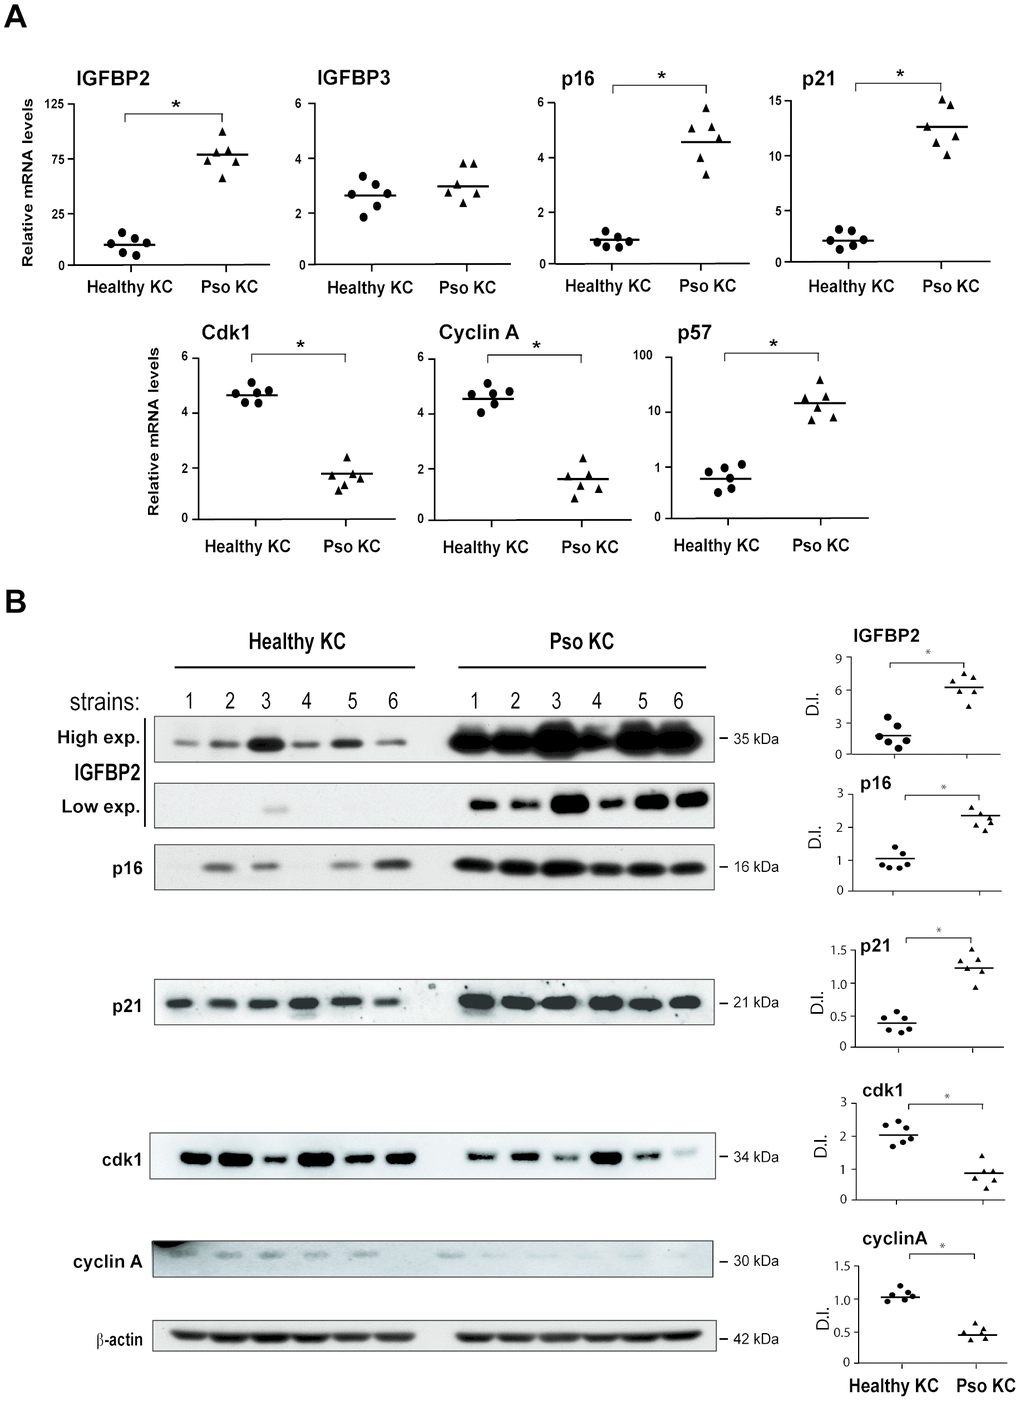 Psoriatic keratinocyte cultures display enhanced IGFBP2 expression, together with an altered expression of genes implicated in the regulation and cell cycle arrest. (A) Real-time PCR analysis was performed on keratinocyte cultures (at passage P4), obtained from lesional skin of psoriatic patients (n = 6) (pso KC) and healthy volunteers (n = 6) (healthy KC). Results are shown as individual values of relative mRNA levels (normalized to β-actin) of IGFBP2, IGFBP3, p16, p21 Cdk1, cyclin A and p57 and means of the two different groups. (B) WB analysis was performed on protein lysates from keratinocyte cultures isolated from healthy (n = 6) and lesional skin (n = 6) by using anti-IGFBP2, cyclin A, cdk1, -p16 and -p21 Abs. β-actin was used as loading control. Bands relative to IGFBP2 were showed at two different exposure times (High exp. 1 min; low exp., 30 seconds). Graphs represent the individual values and the means of the densitometric intensity (D.I.) of each band. (A, B), *p ≤ 0.05, as calculated by the Mann–Whitney U test.